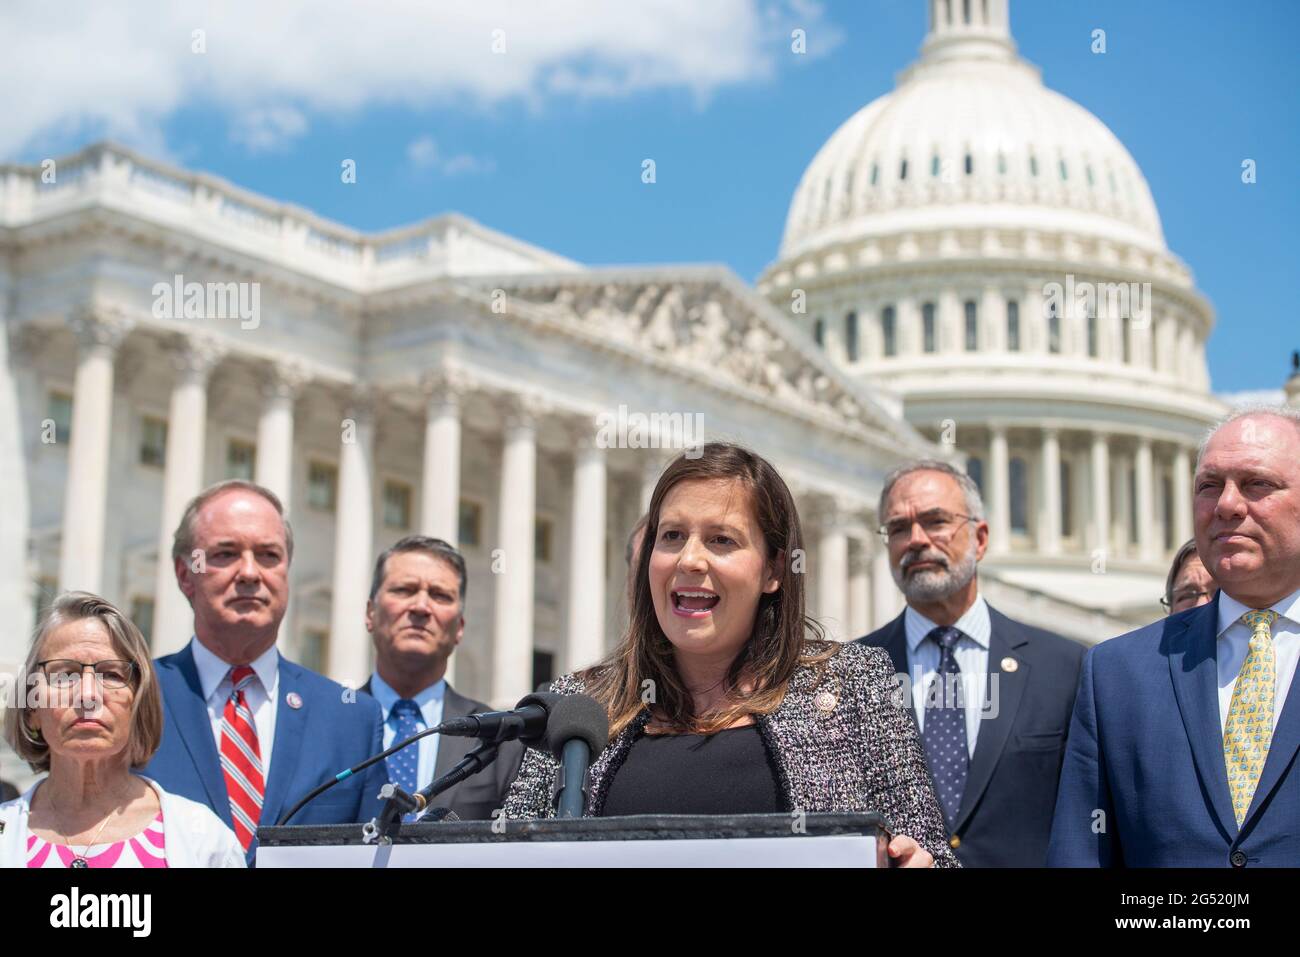 https://c8.alamy.com/comp/2G520JM/united-states-representative-elise-stefanik-republican-of-new-york-offers-remarks-while-joined-by-the-gop-doctors-caucus-during-a-press-conference-on-the-origins-of-the-covid-19-pandemic-outside-the-the-us-capitol-in-washington-dc-thursday-june-24-2021-credit-rod-lamkeycnp-mediapunch-2G520JM.jpg